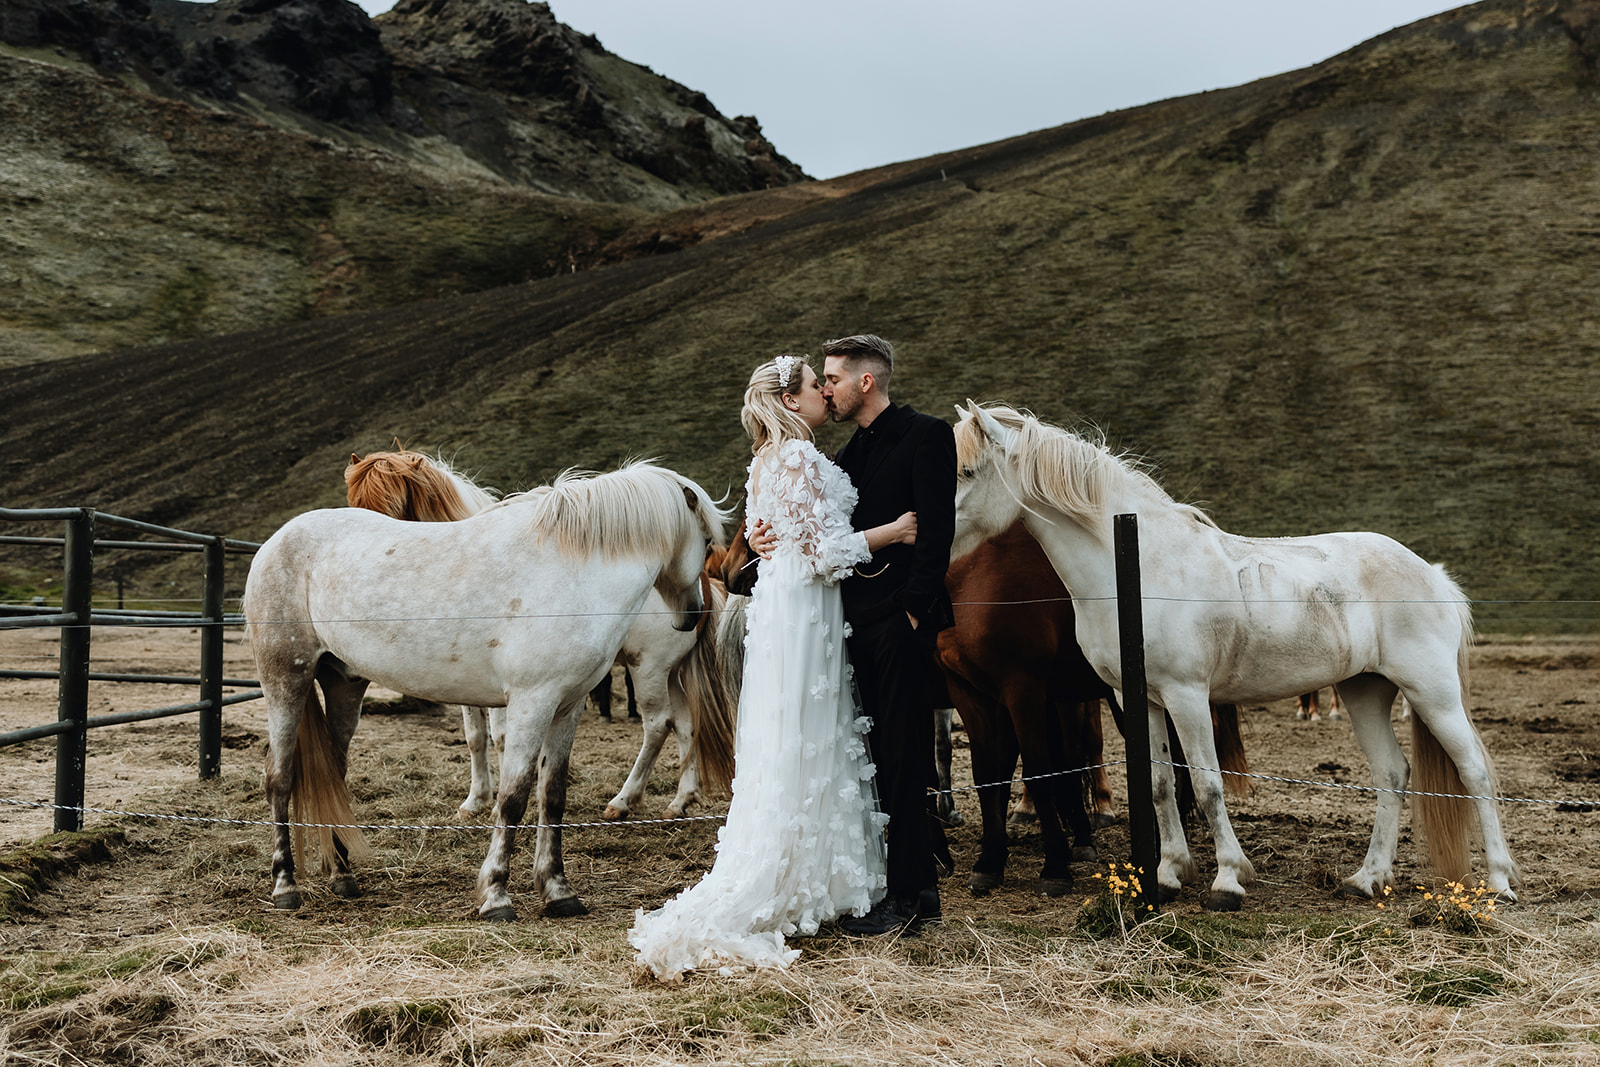 Bride and groom standing in front of majestic horses in the Icelandic highlands, capturing a unique wedding moment 